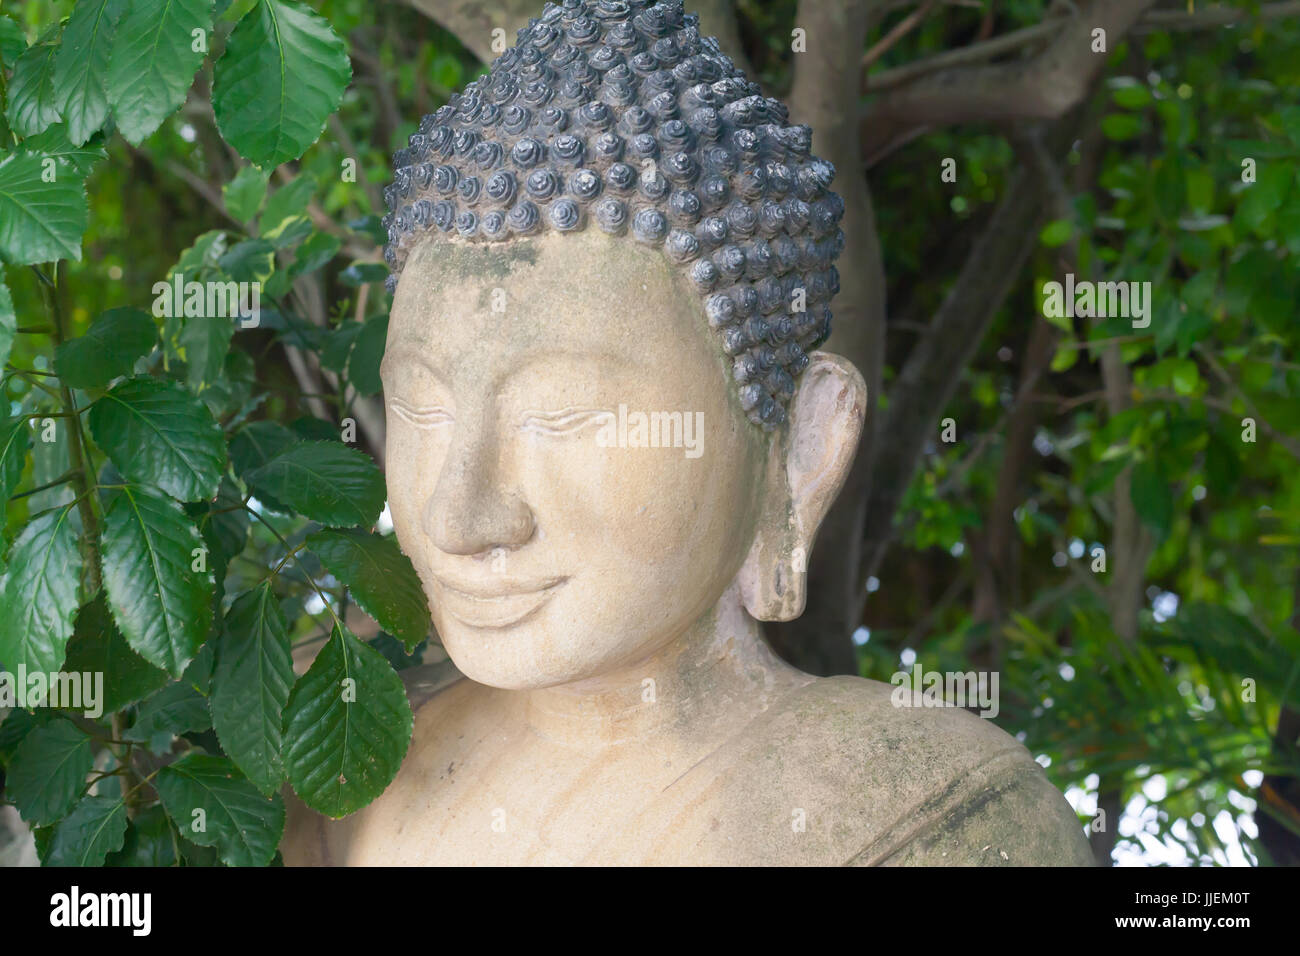 Ancient Buddha Statue Portrait close up in Cambodian Temple Green Plants with big leaves Stock Photo